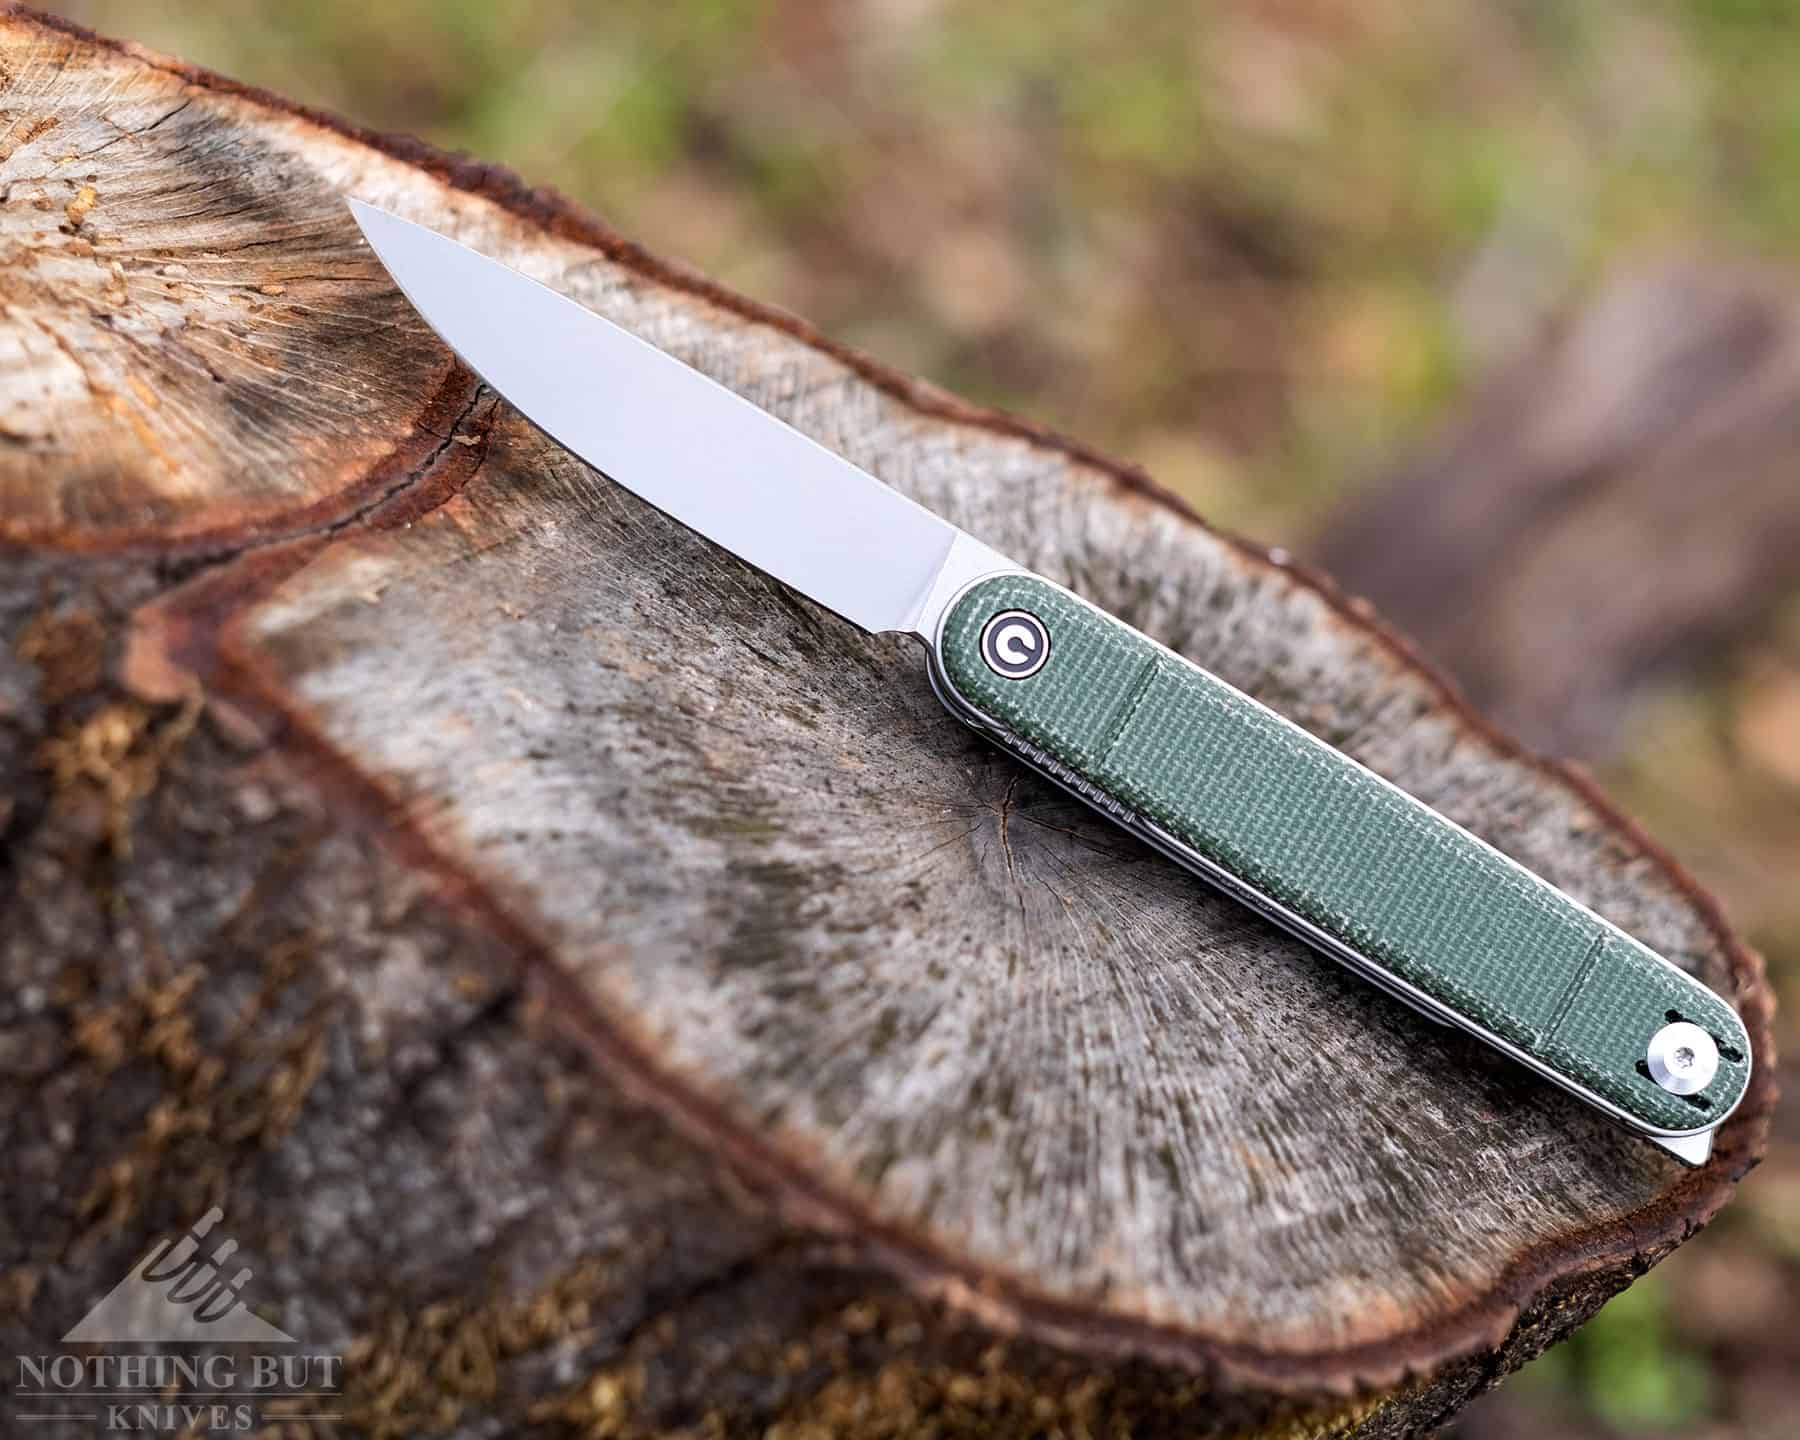 The Civivi Crit folding knife with one blade open on a tree stump.